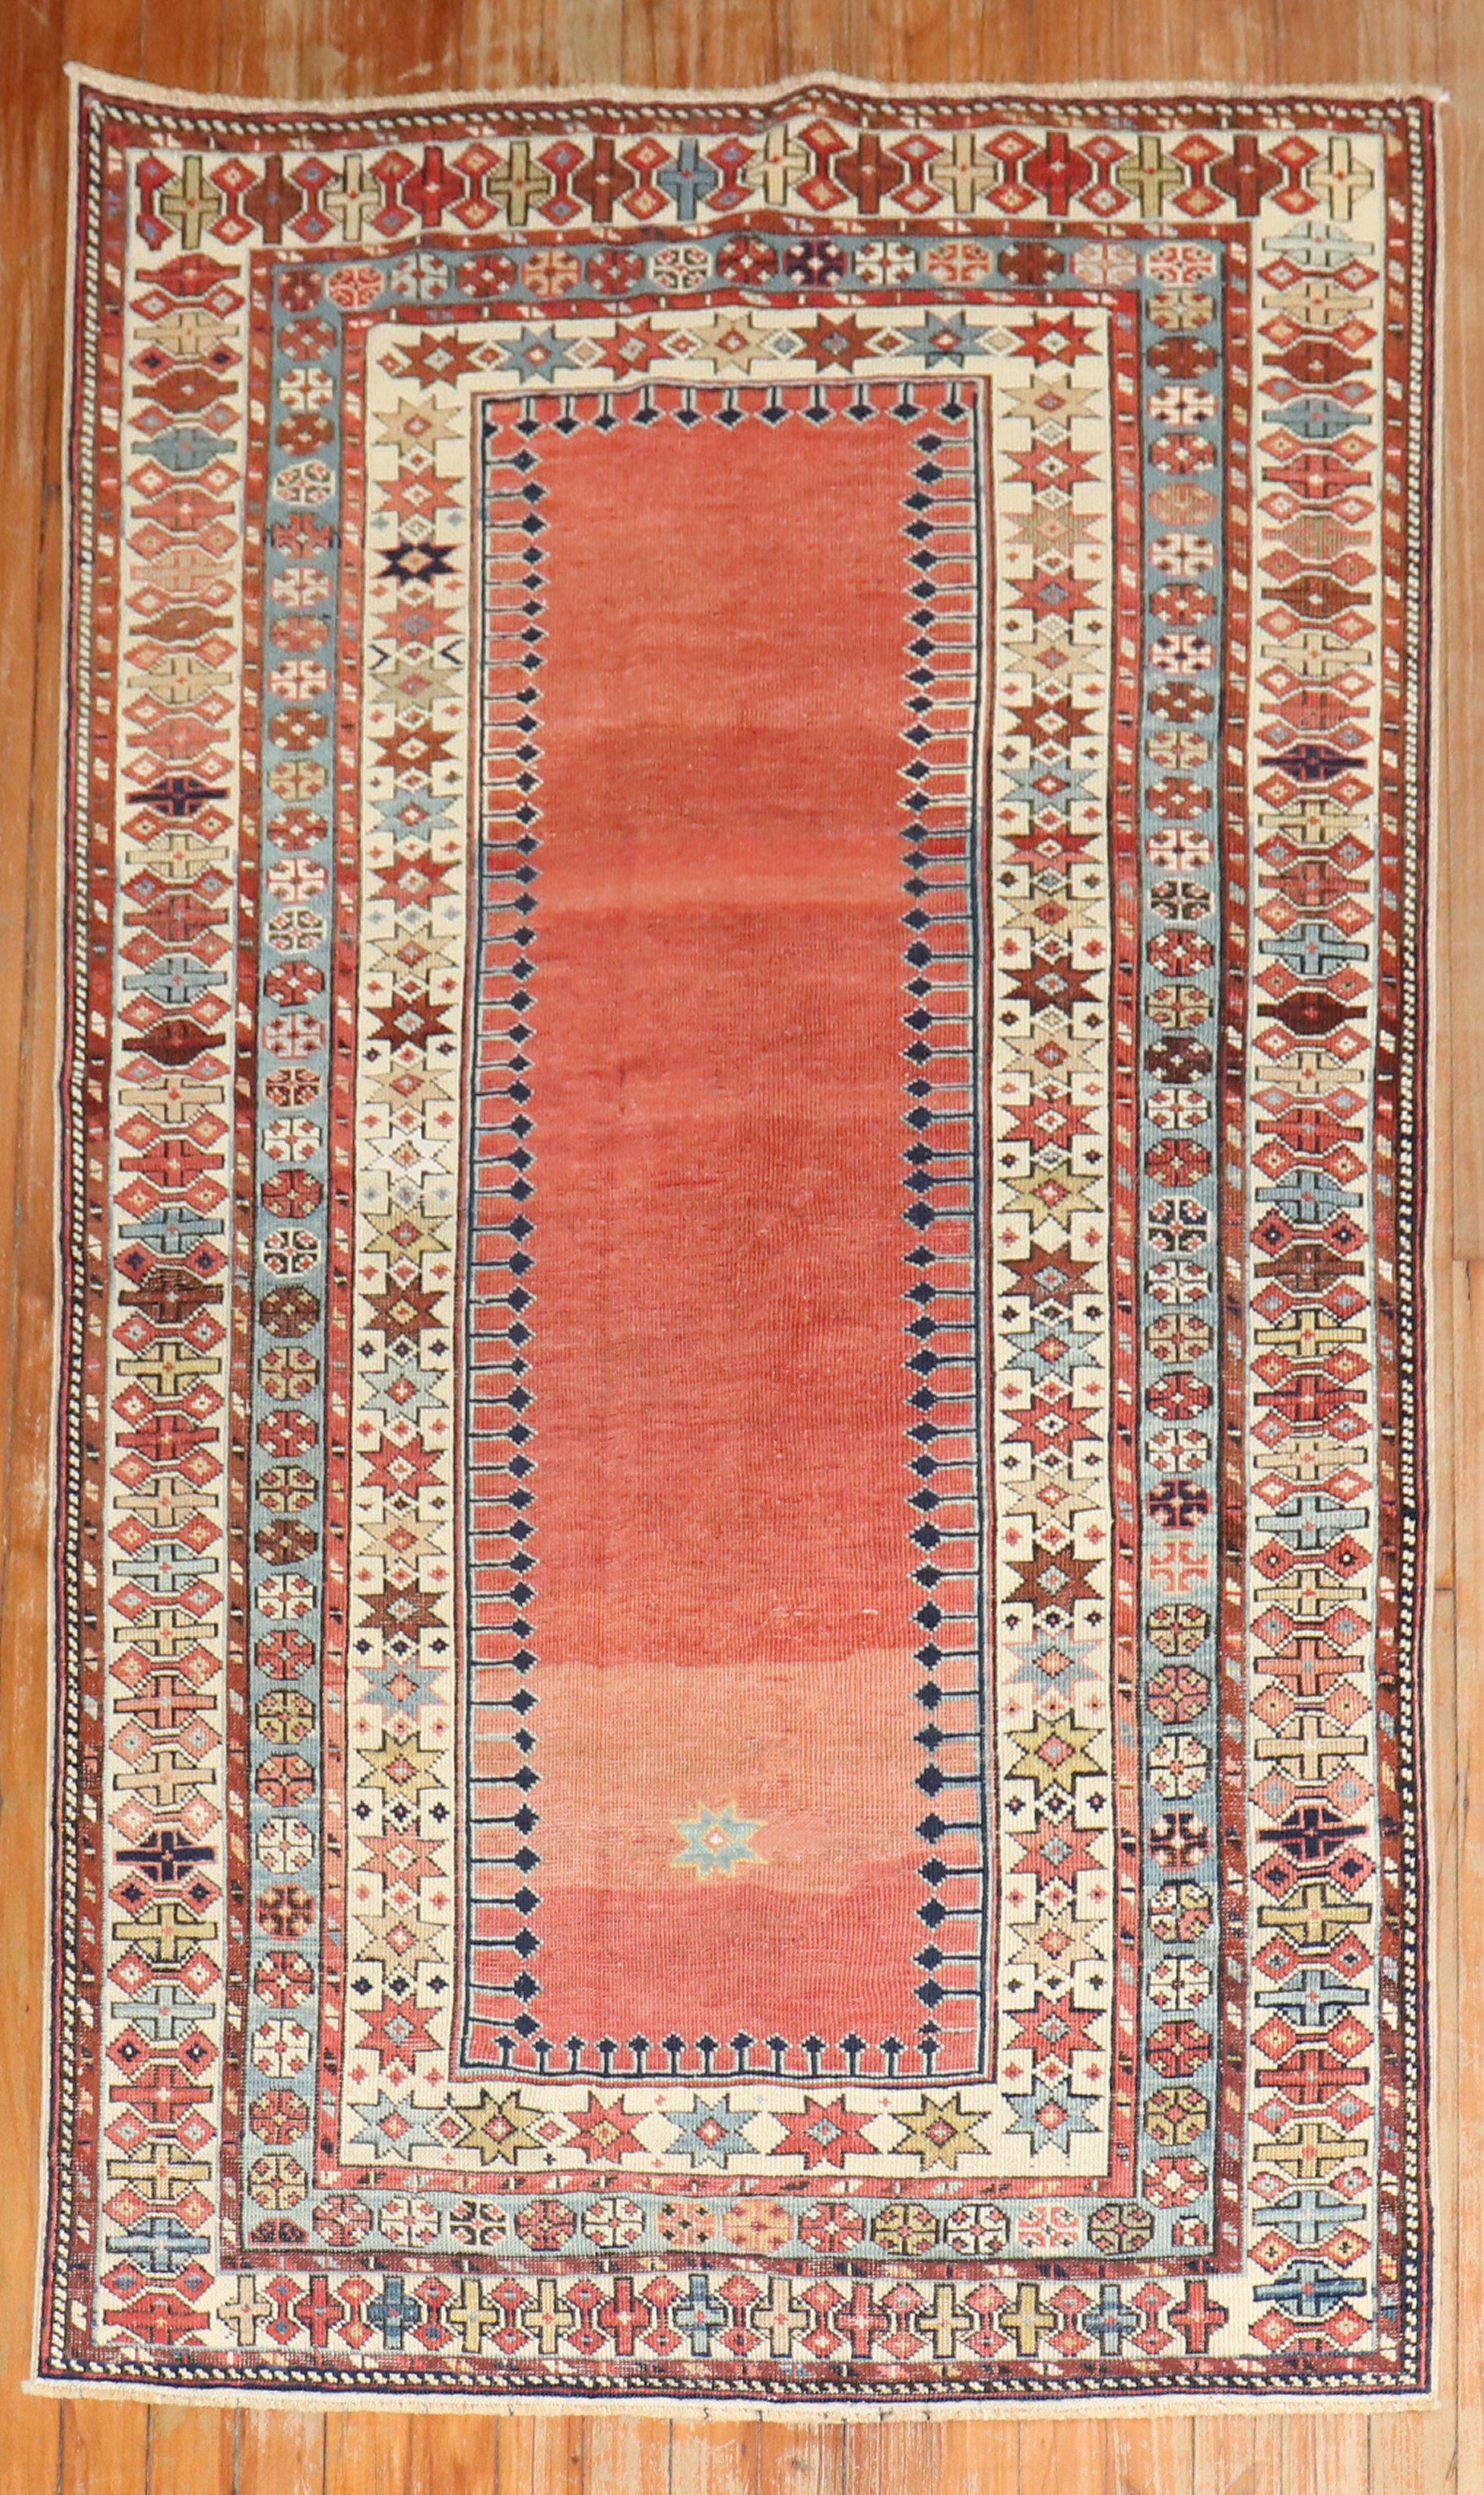 19th Century Tribal Caucasian Shirvan rug

Measures: 3' x 5'4”

Antique Caucasian rugs from the Shirvan district village are still considered one of the best decorative and collector type of rugs from that the Caucasian regions/villages. Similar